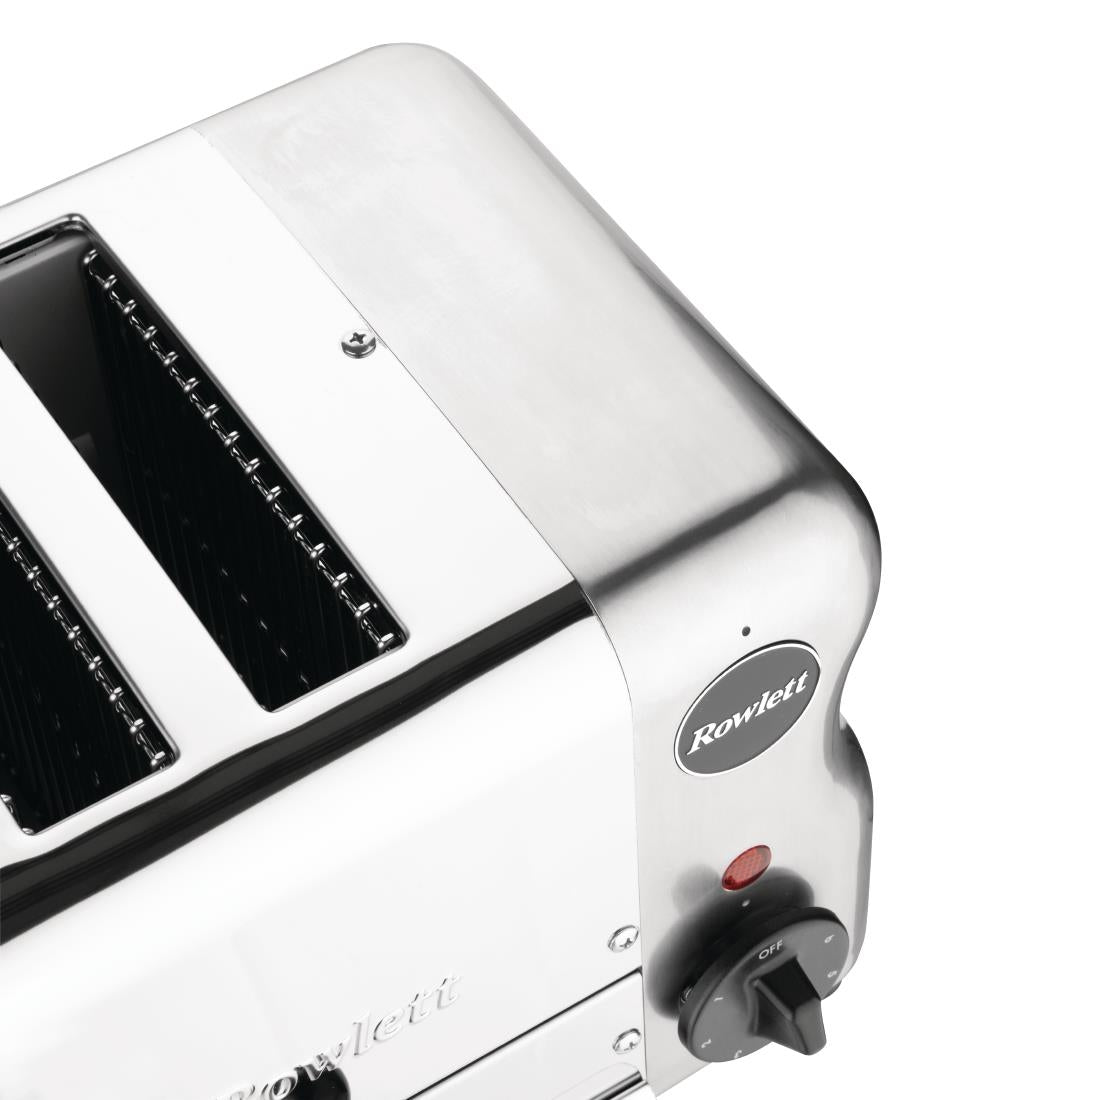 CH177 Rowlett Esprit 2 Slot Toaster Chrome w/2 x Additional Elements & Sandwich Cage JD Catering Equipment Solutions Ltd